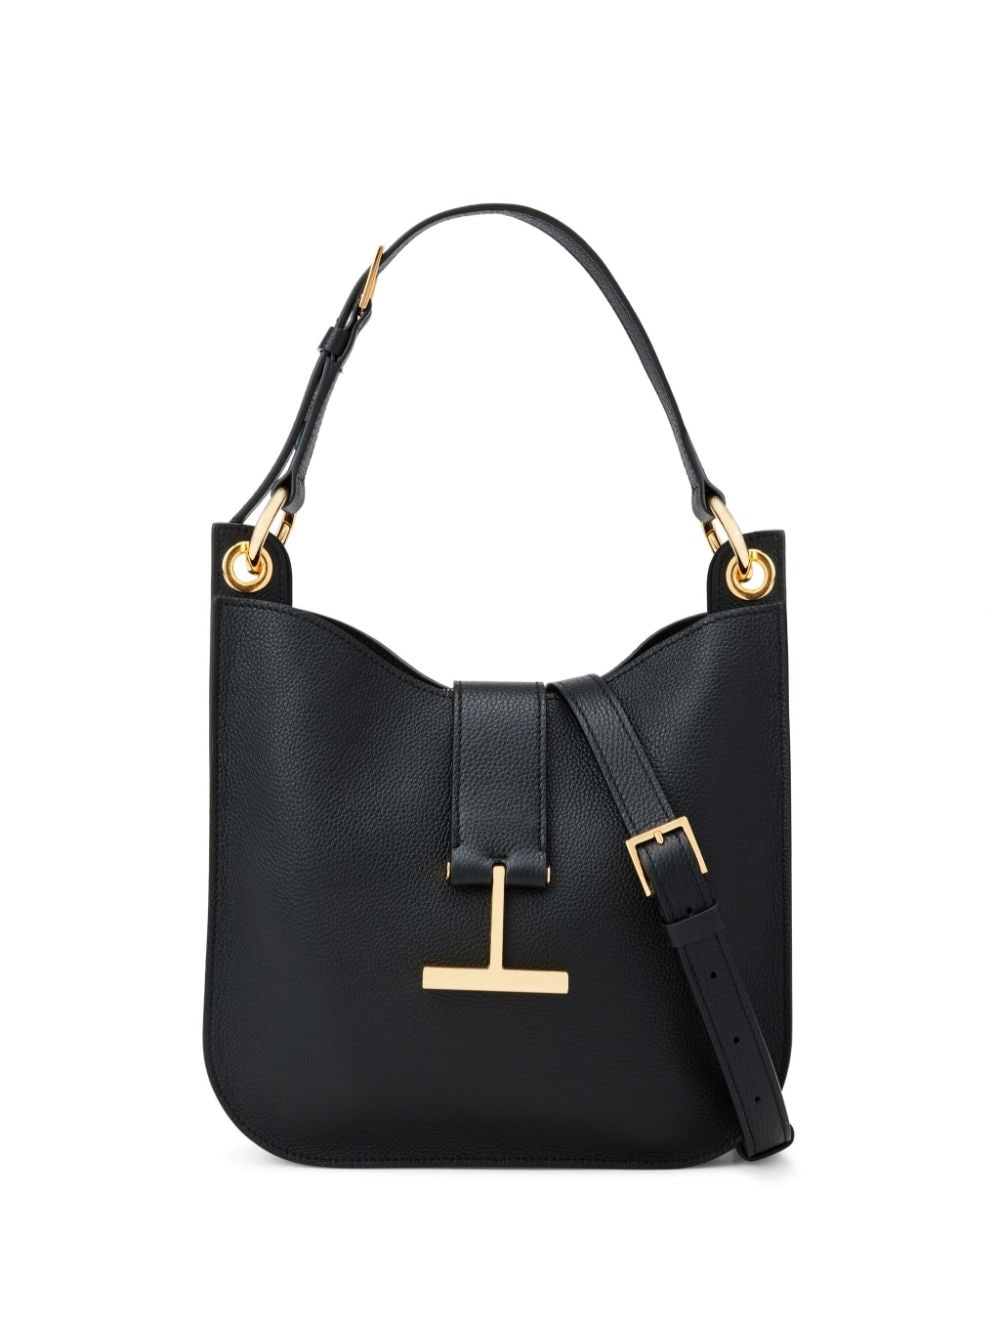 TOM FORD Small Tara Black Leather Tote with Gold-Tone Accents